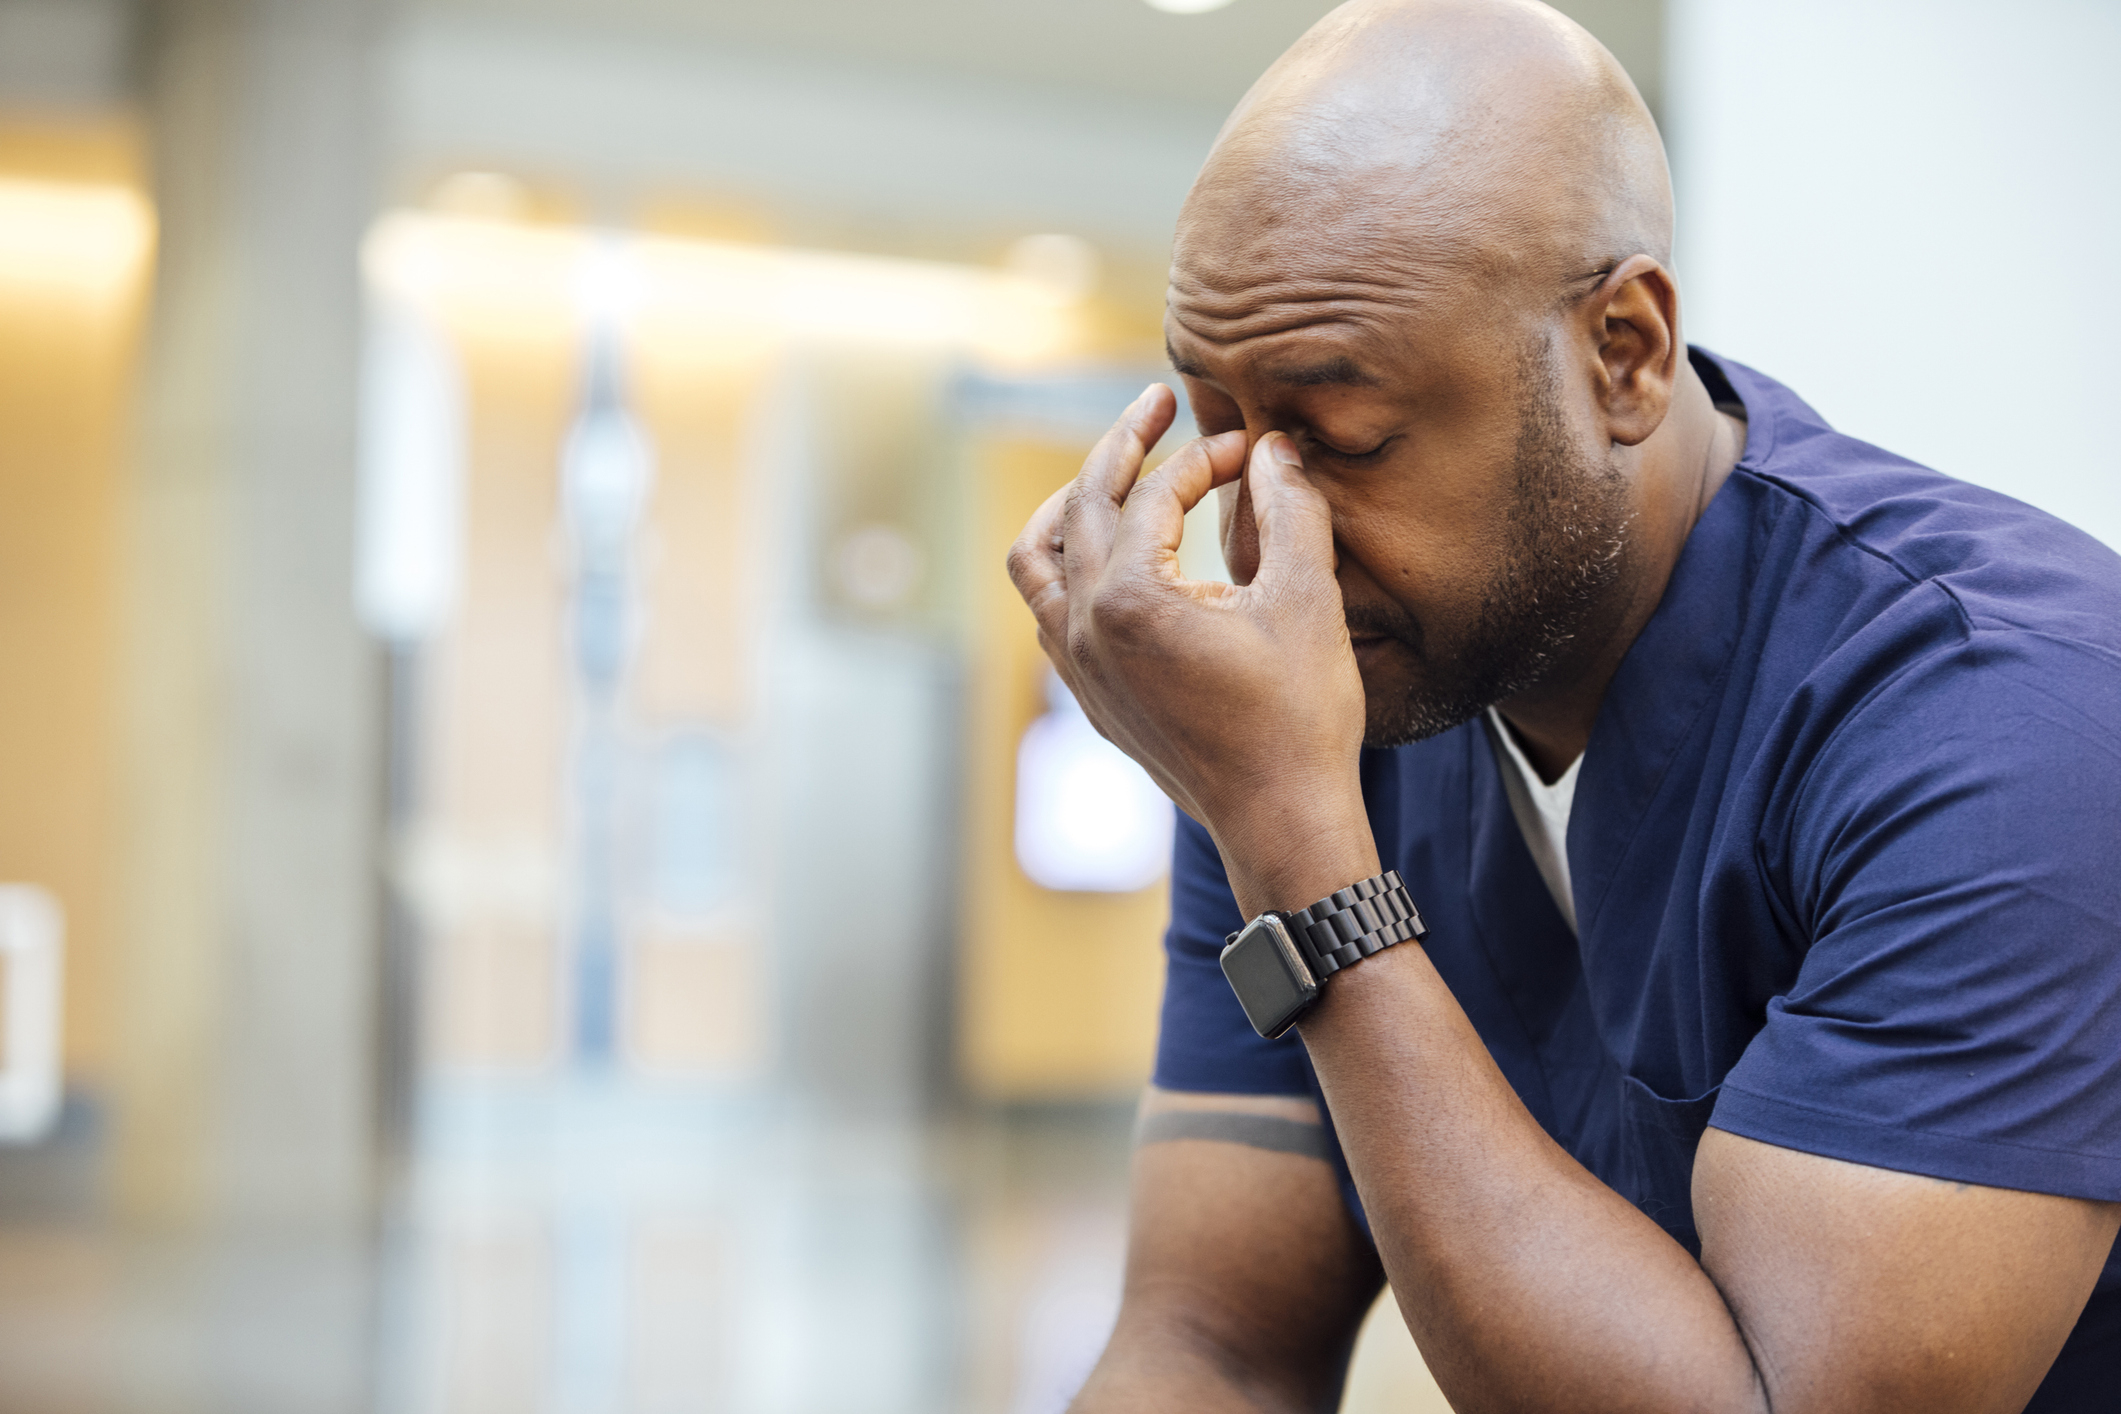 Person in scrubs appearing stressed with hand on forehead